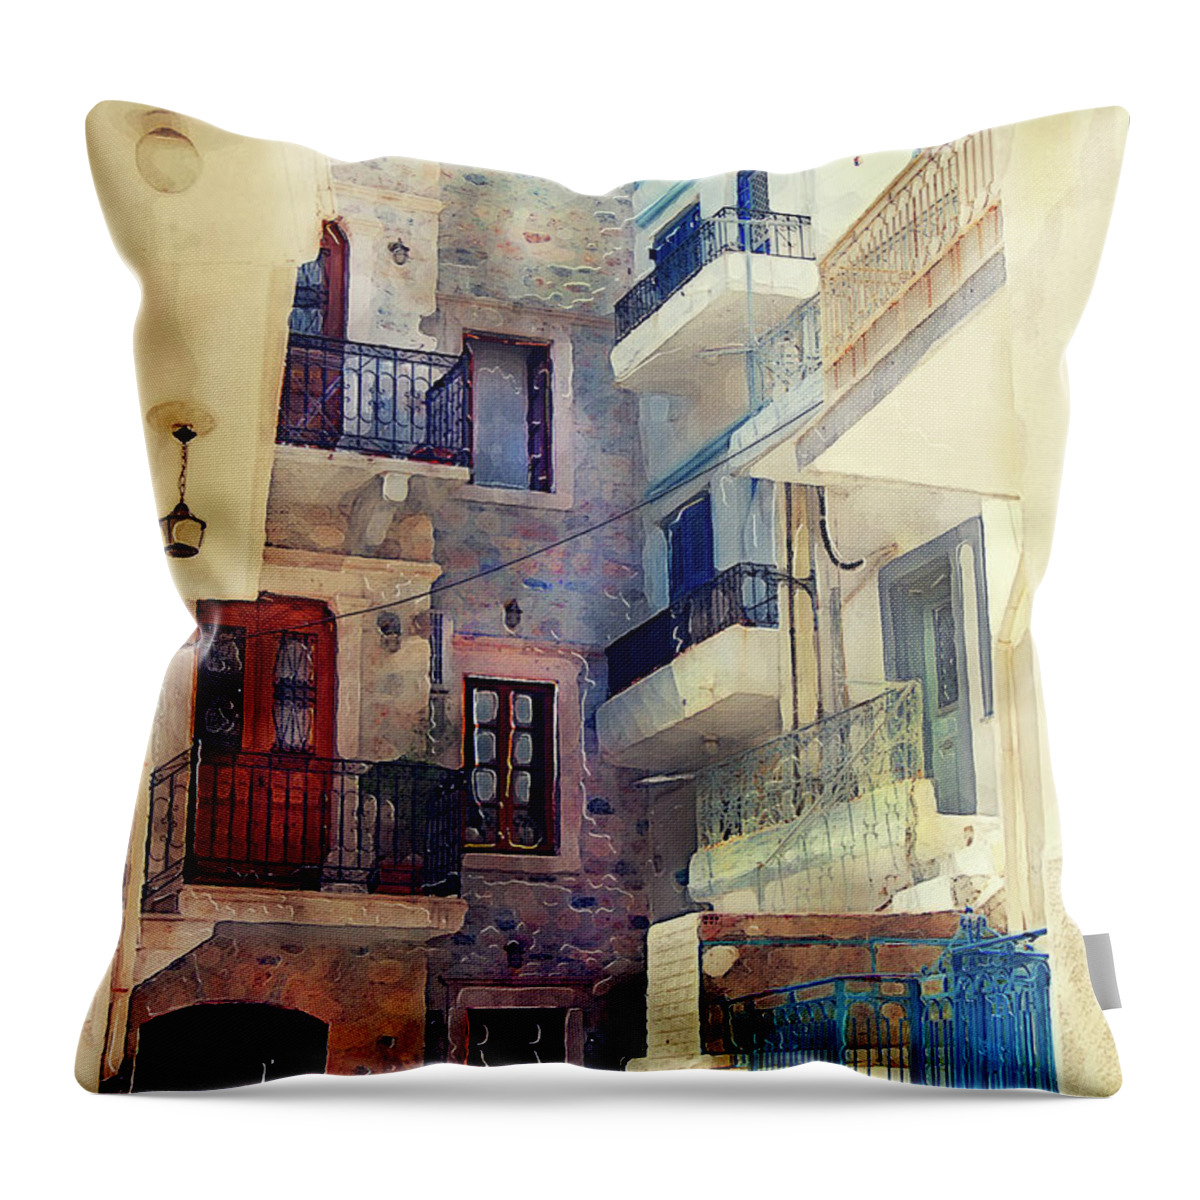 Boat Throw Pillow featuring the painting Kalymnos Greek Island architecture by Justyna Jaszke JBJart